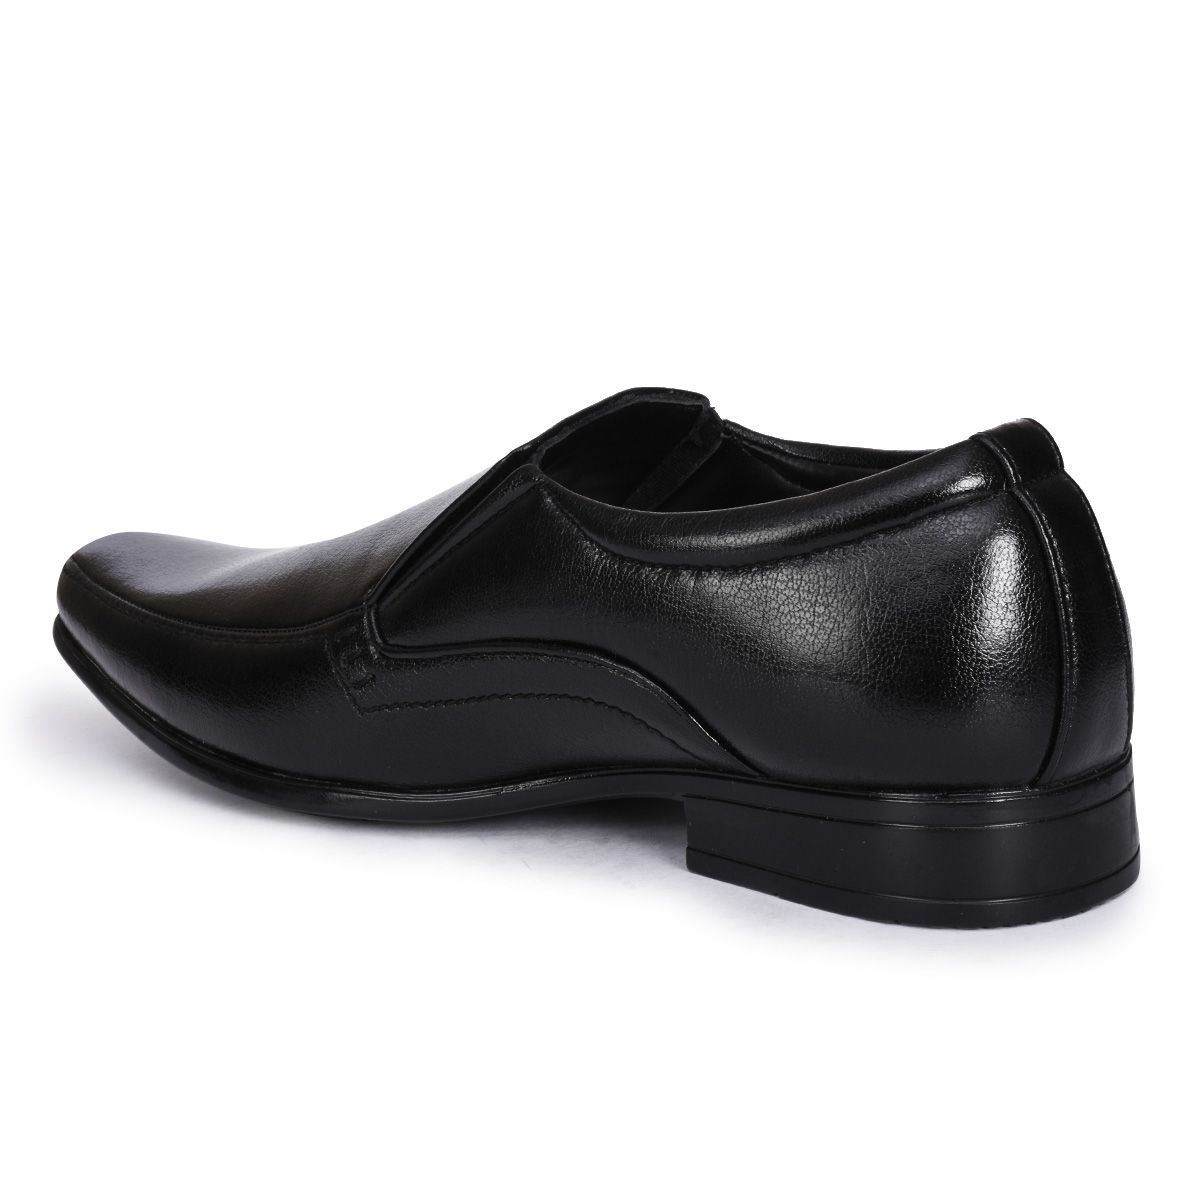 Action Slip On Artificial Leather Black Formal Shoes Price in India ...